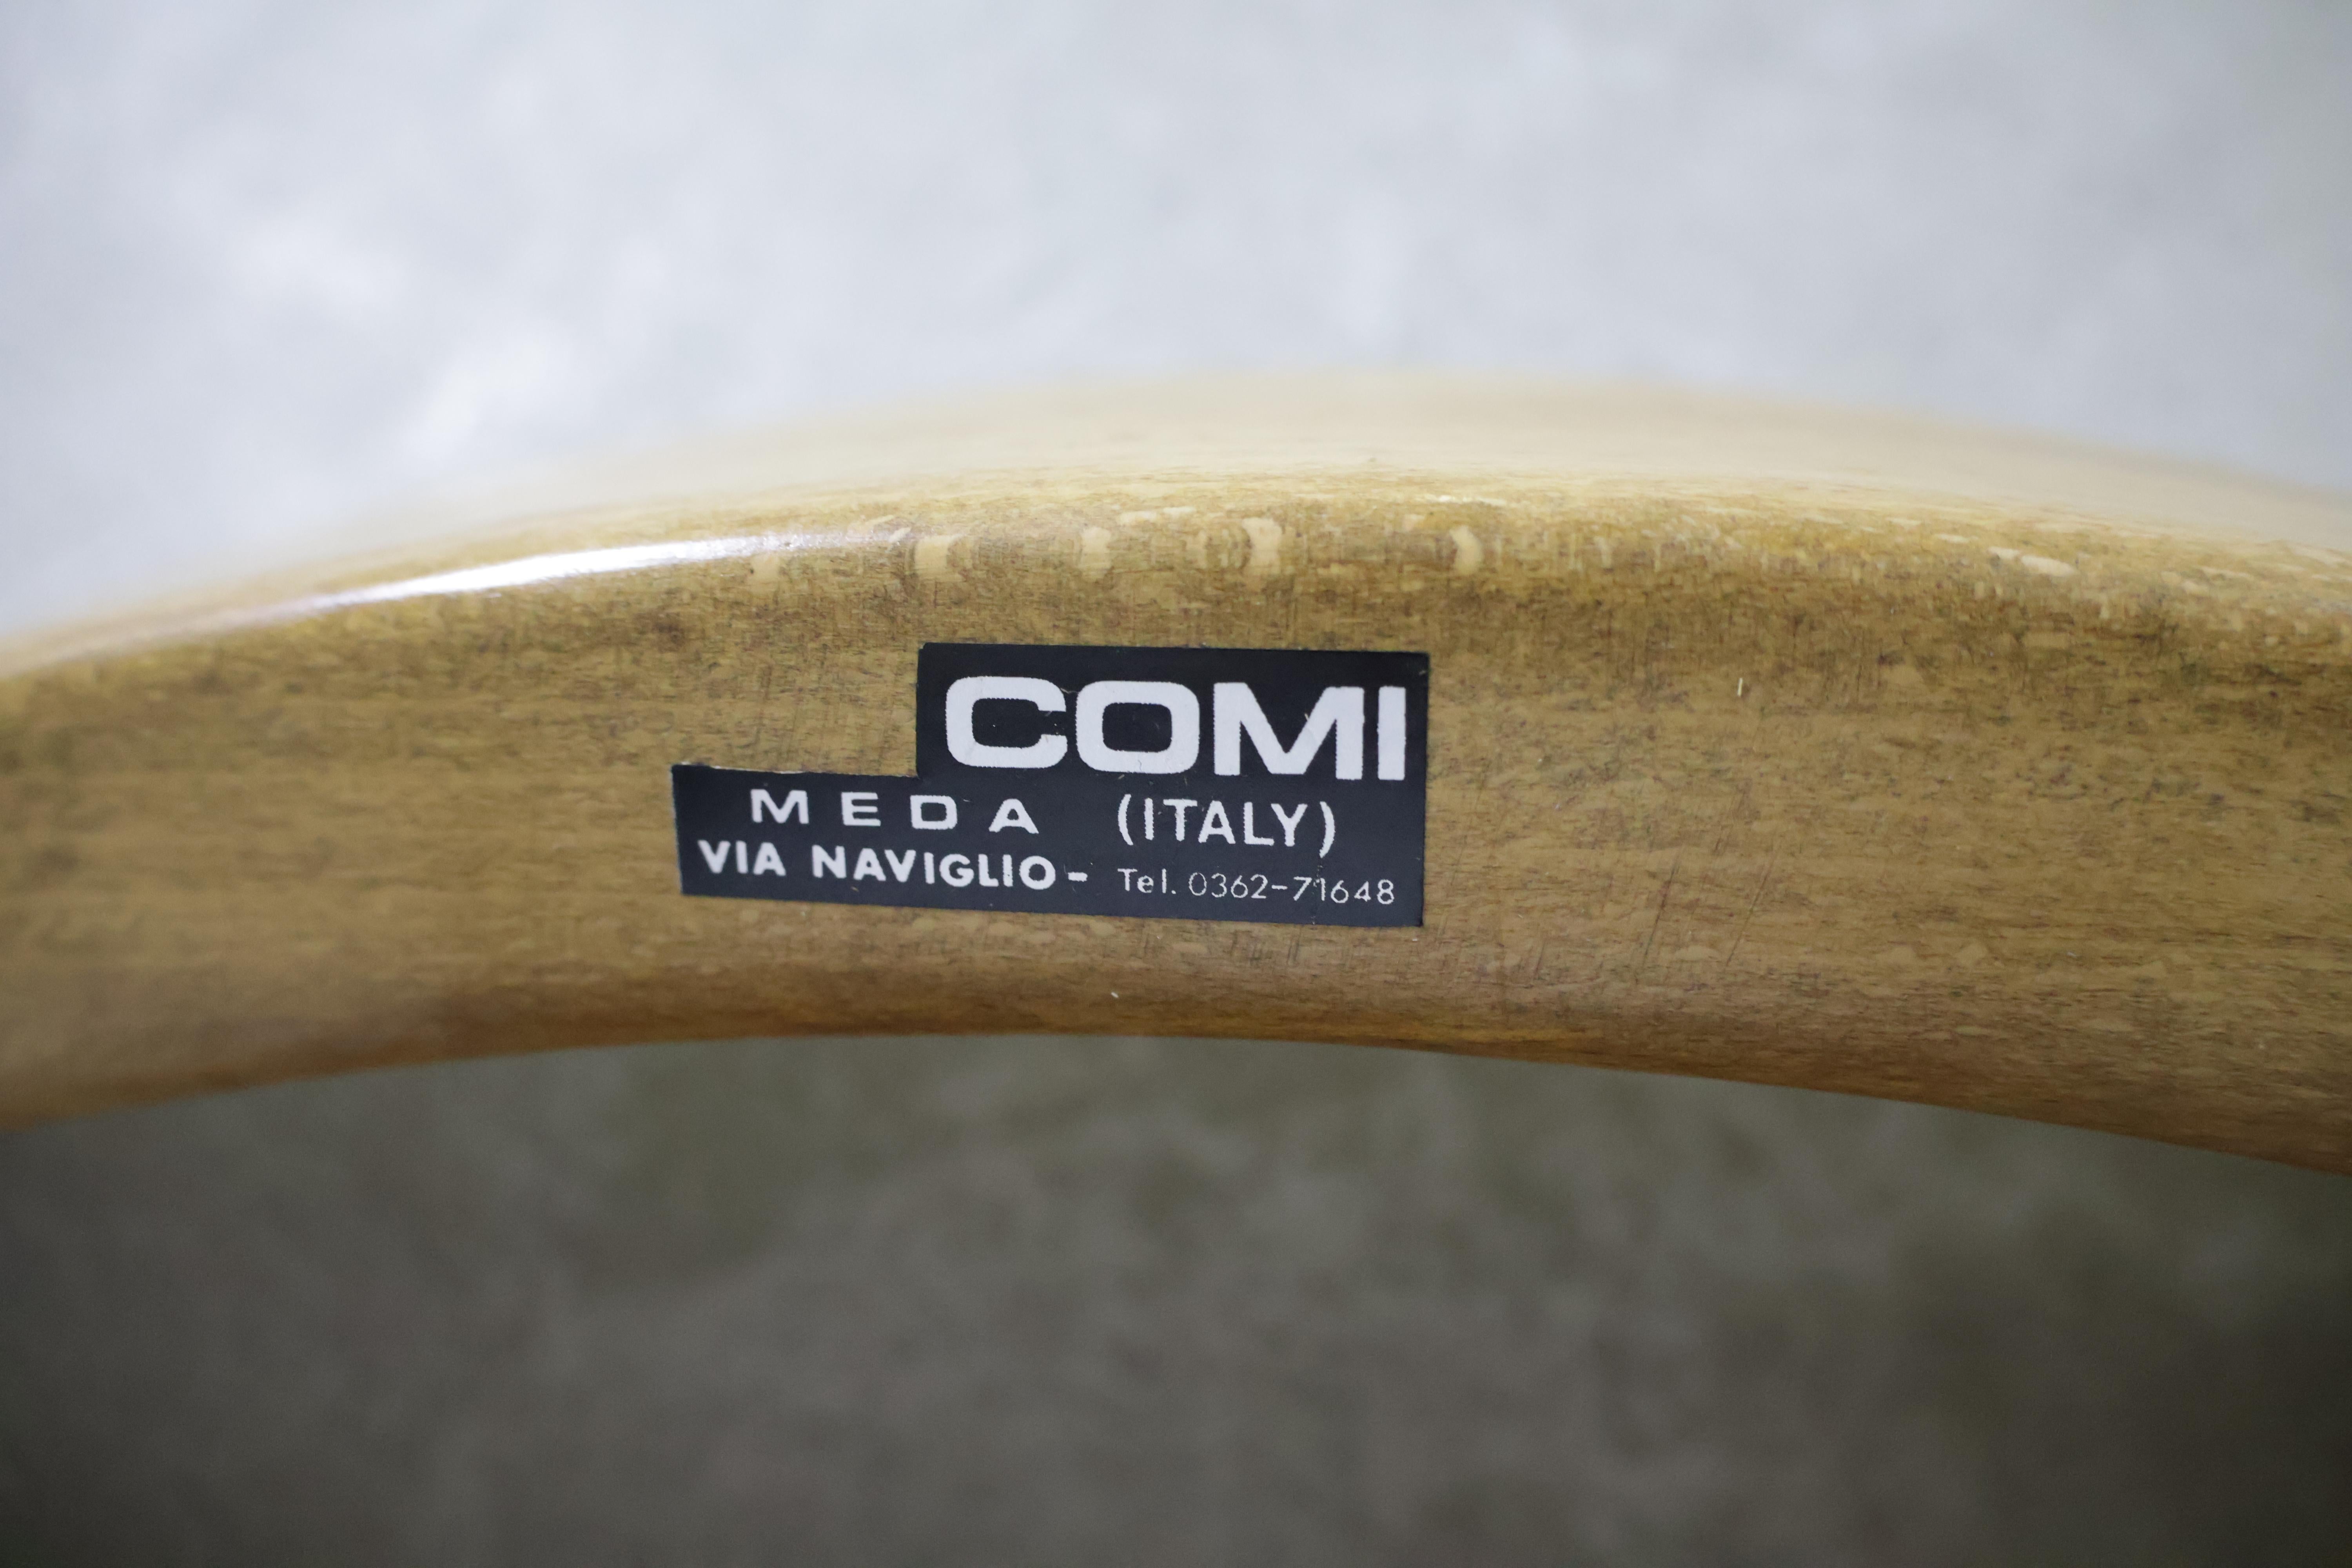 Vico Magistretti 'Carimate' dining chairs produced by Mario Luigi Comi 1960s In Good Condition For Sale In Köln, NRW